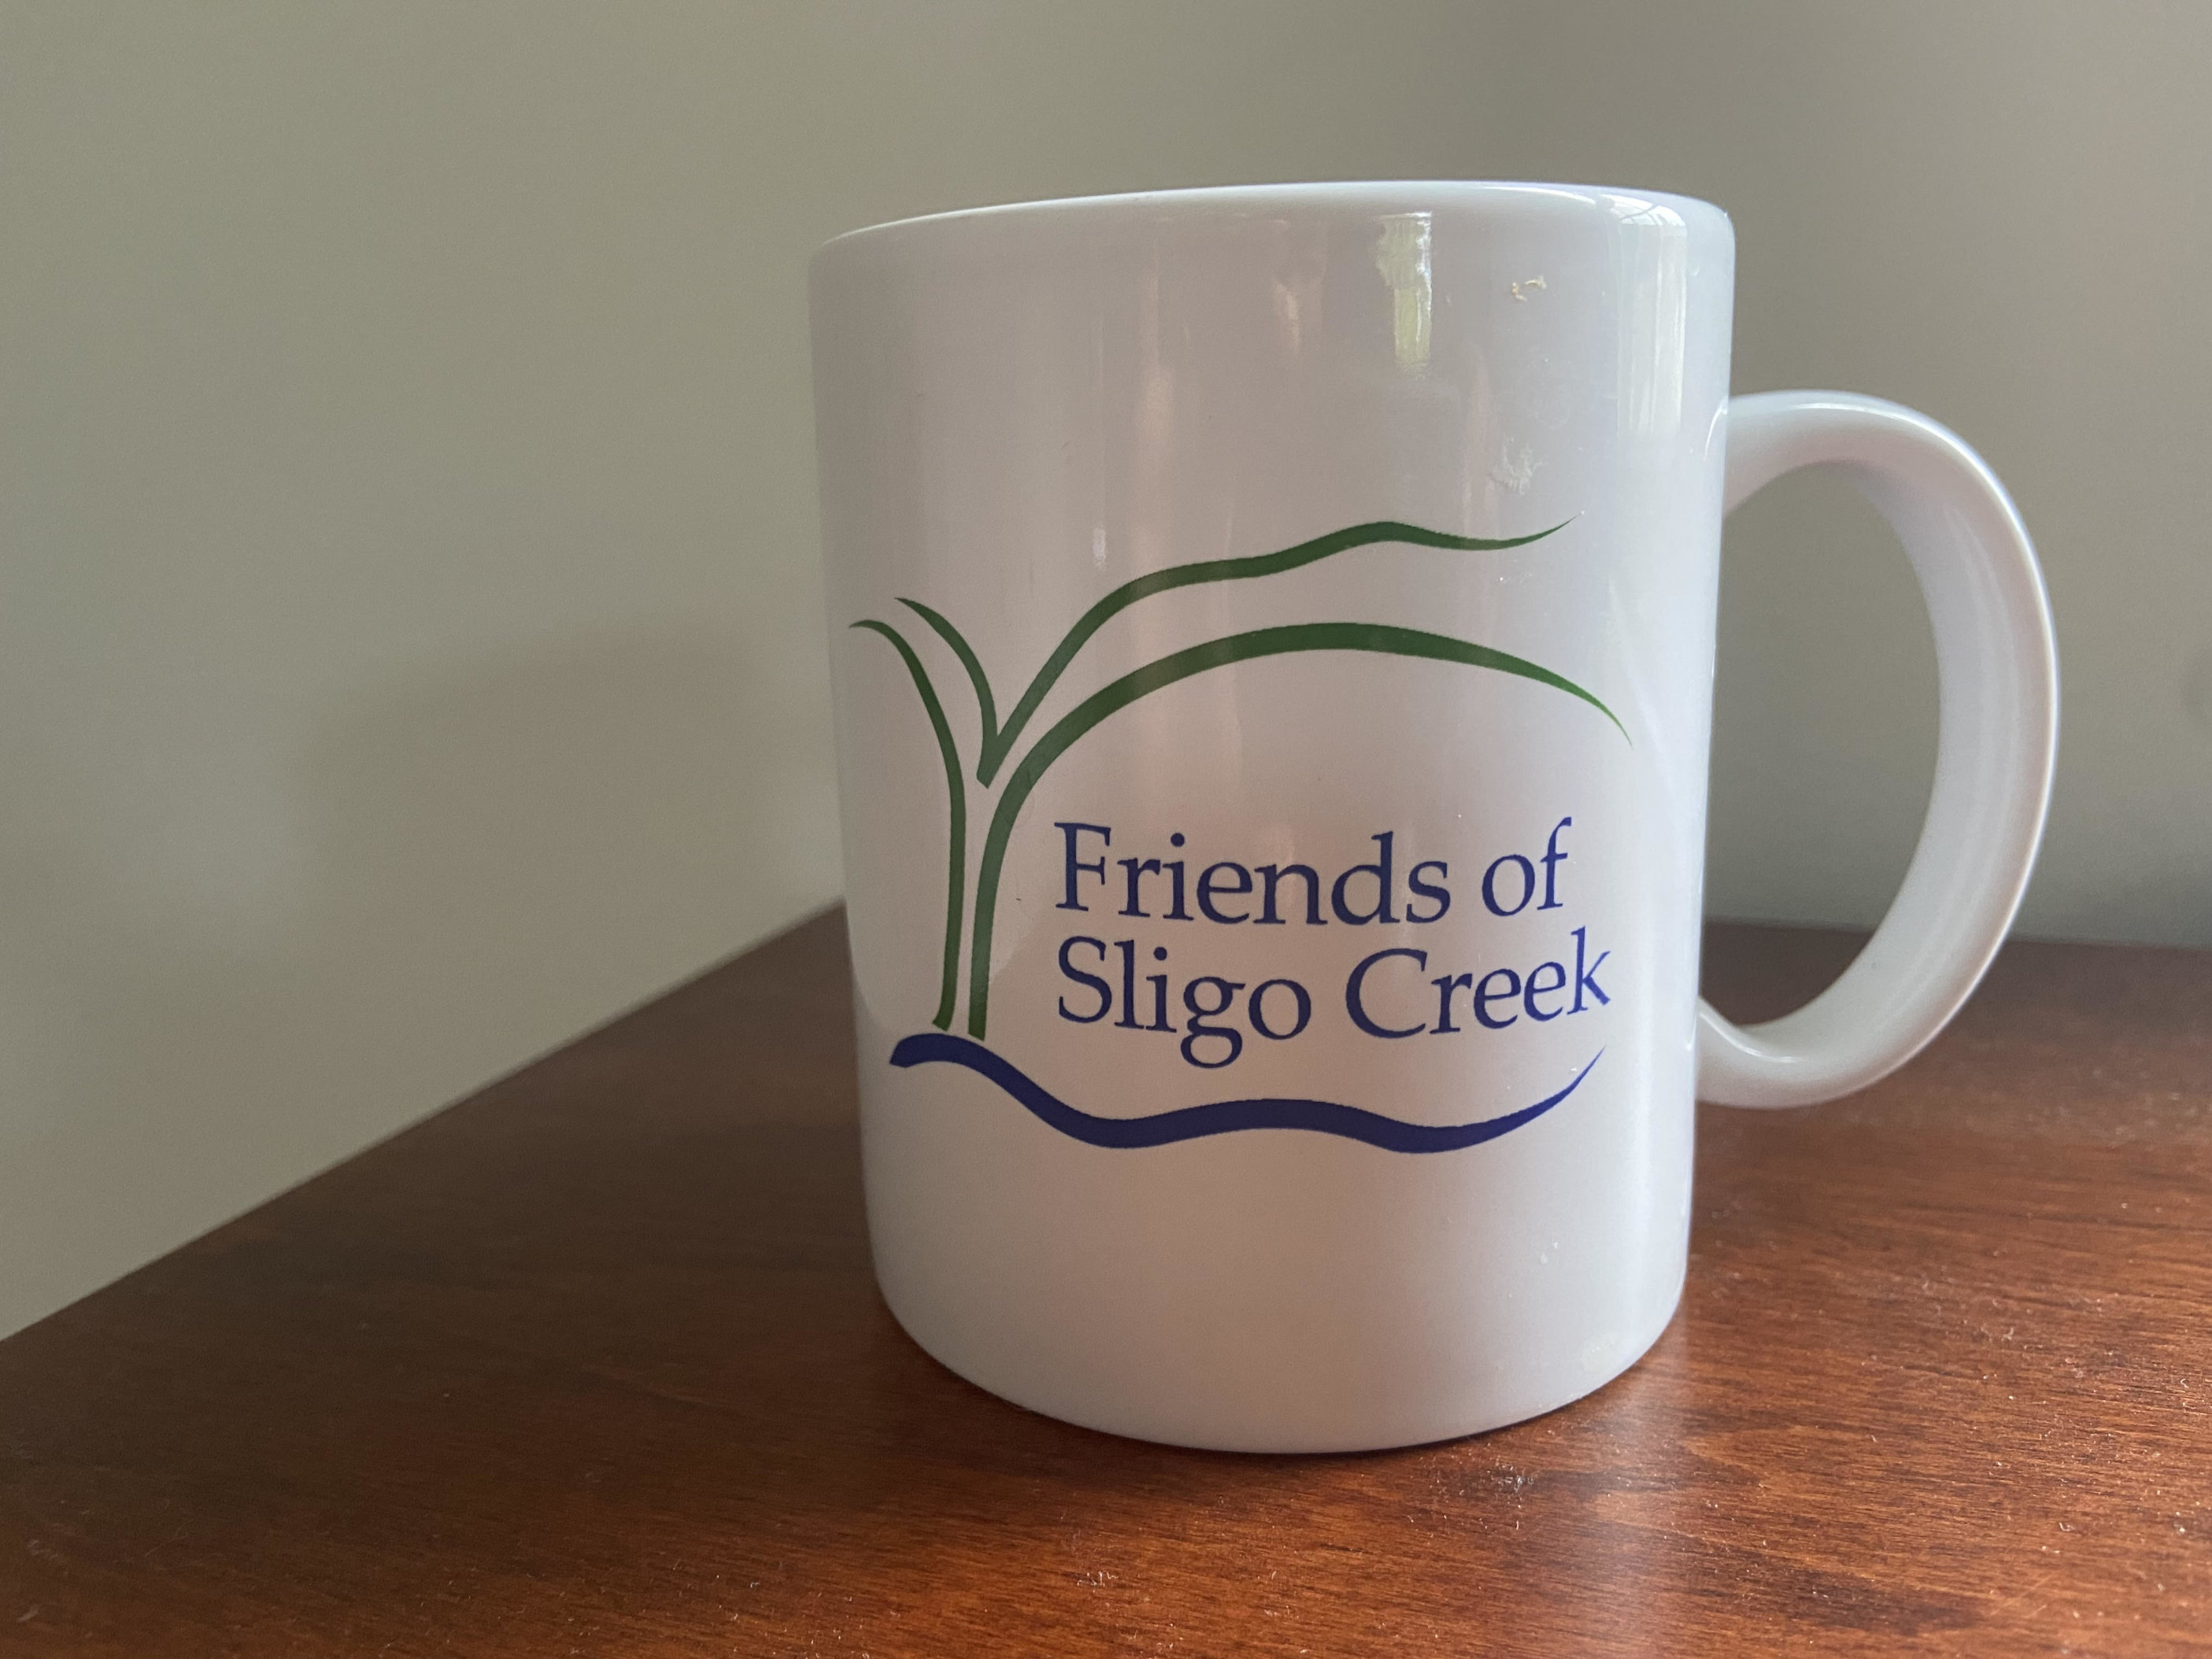 The FOSC mug featuring the logo on the front.